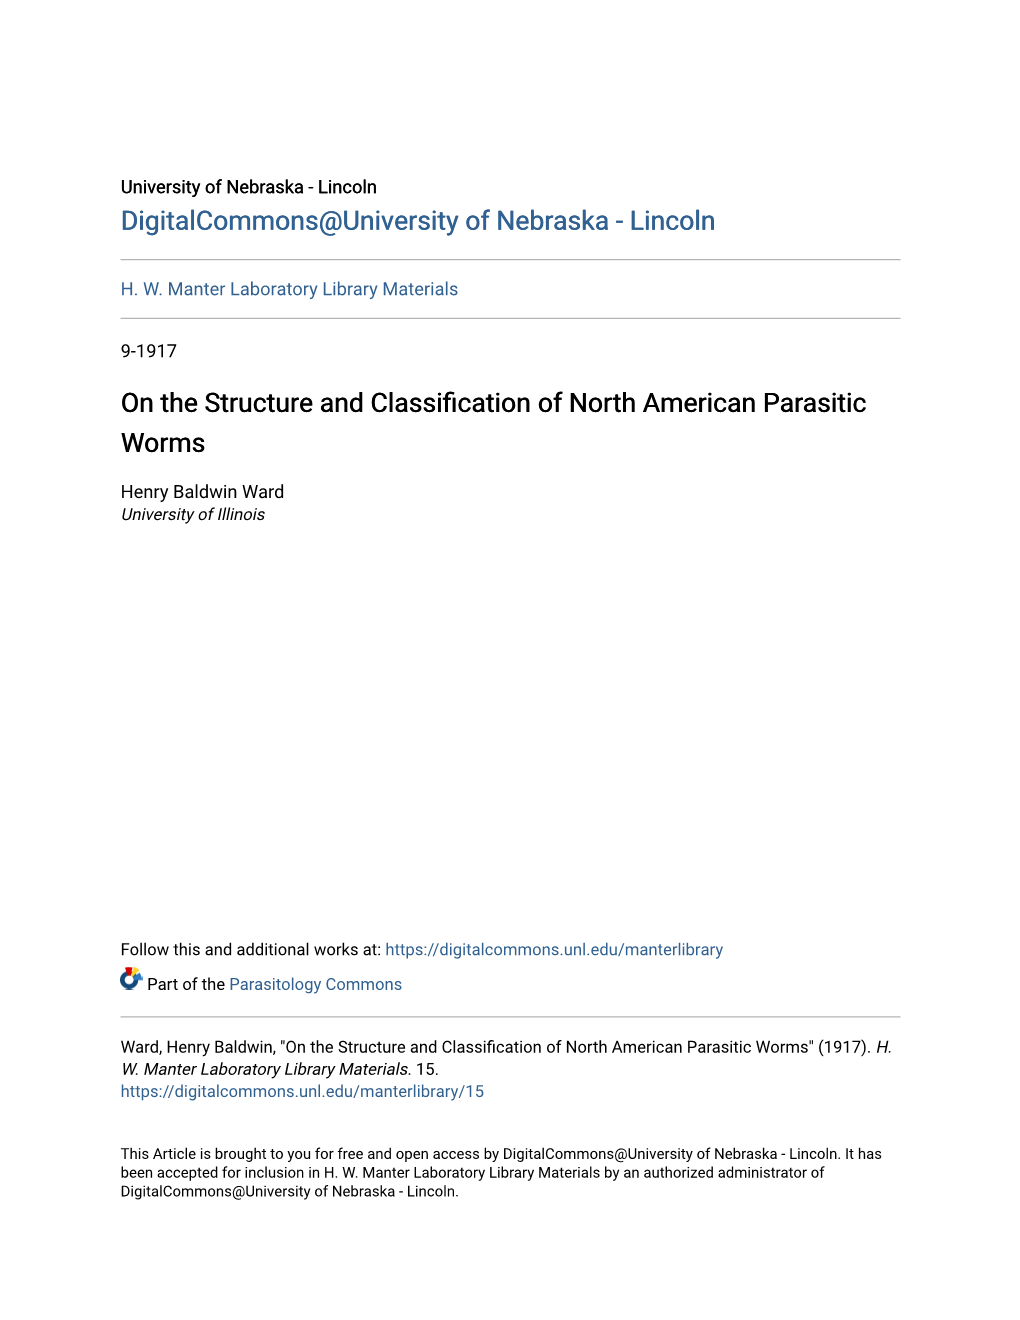 On the Structure and Classification of North American Parasitic Worms